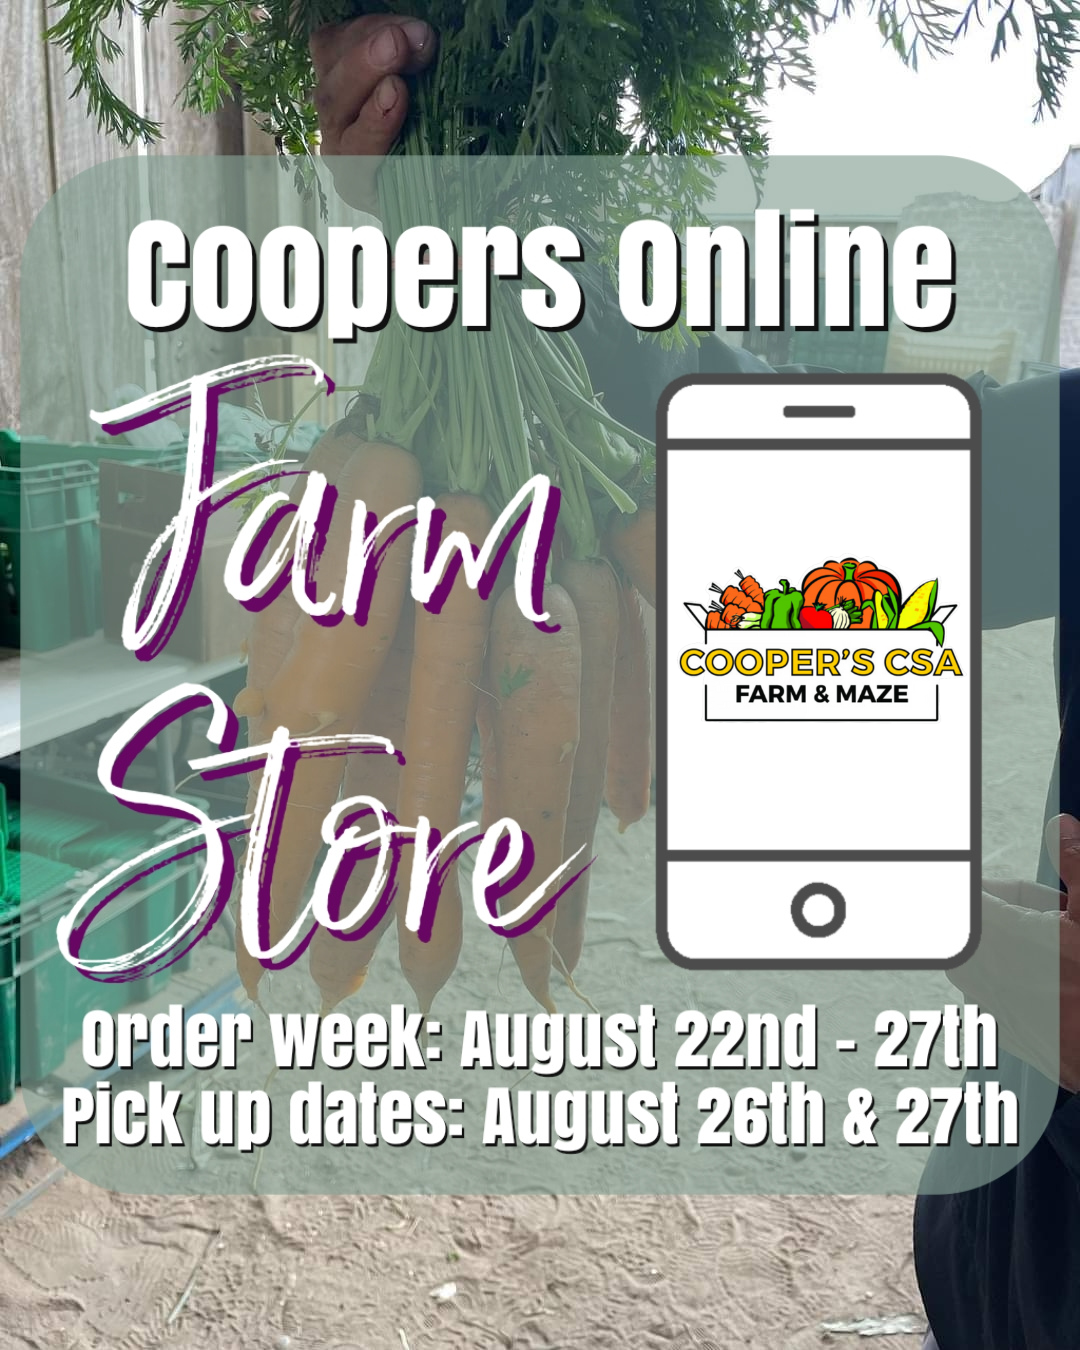 Coopers Farm Stand: Order Week August 22-27th